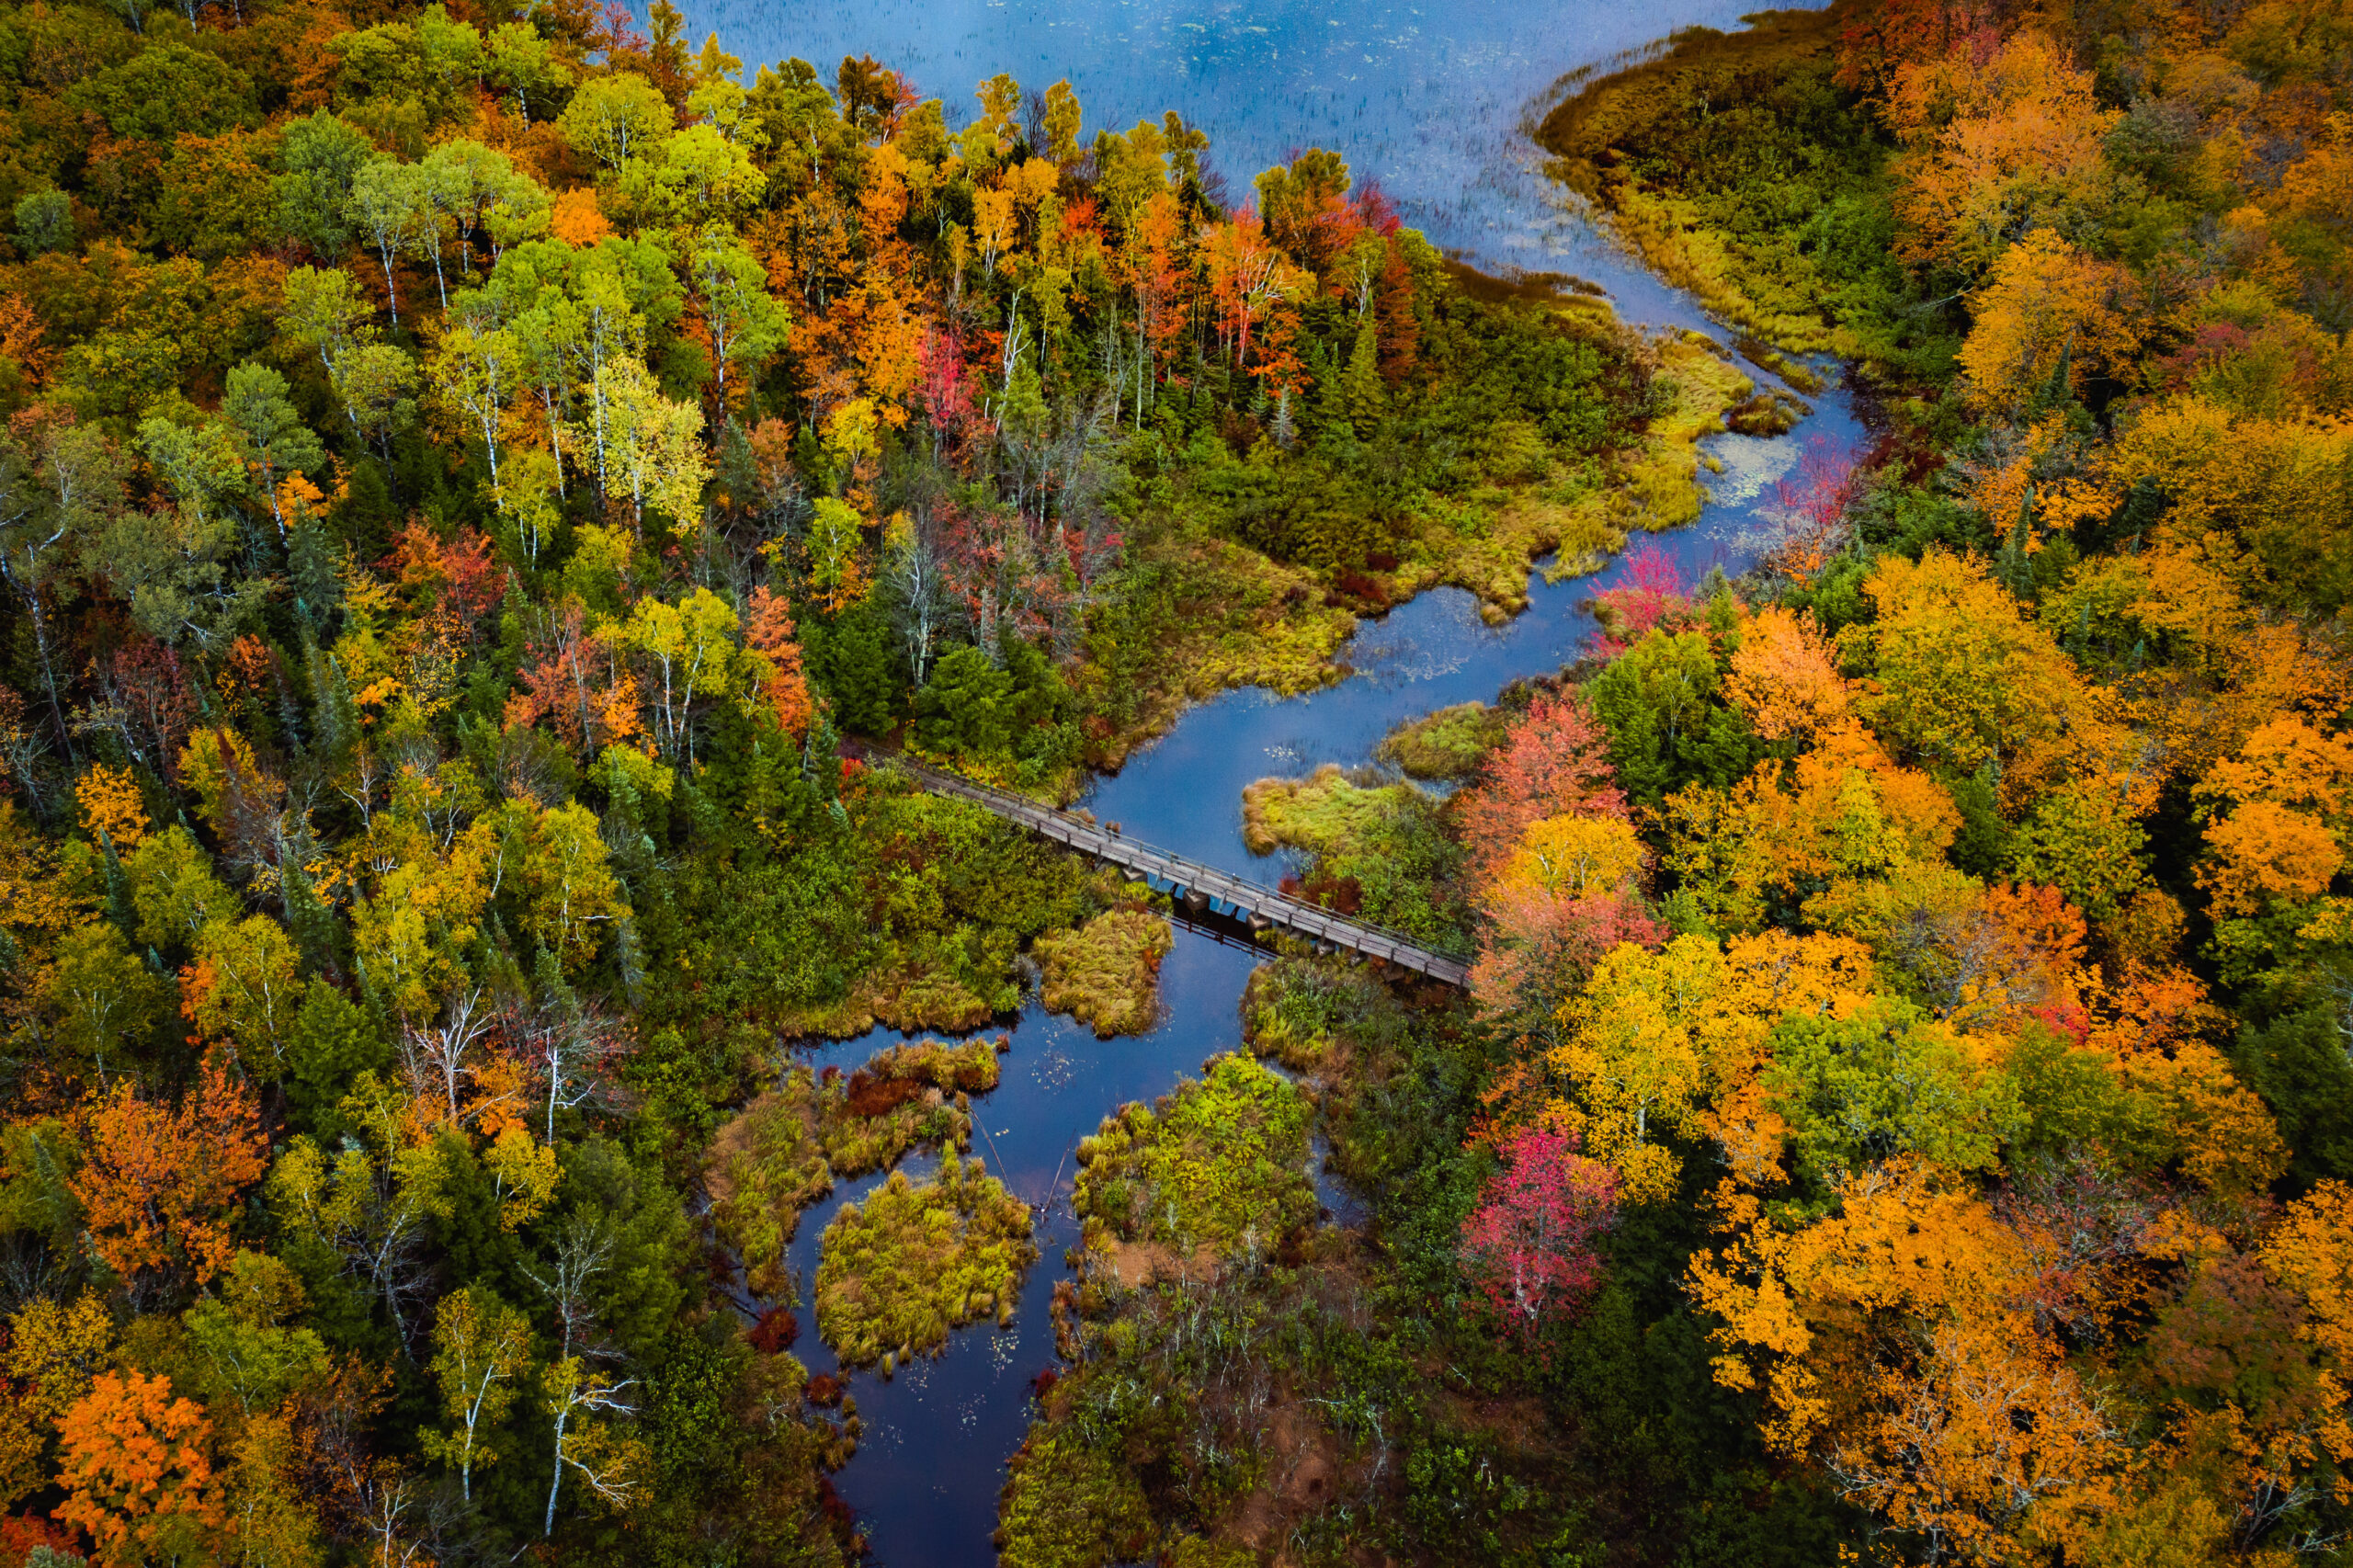 12 Best Places To Experience Fall In Michigan Midwest Explored